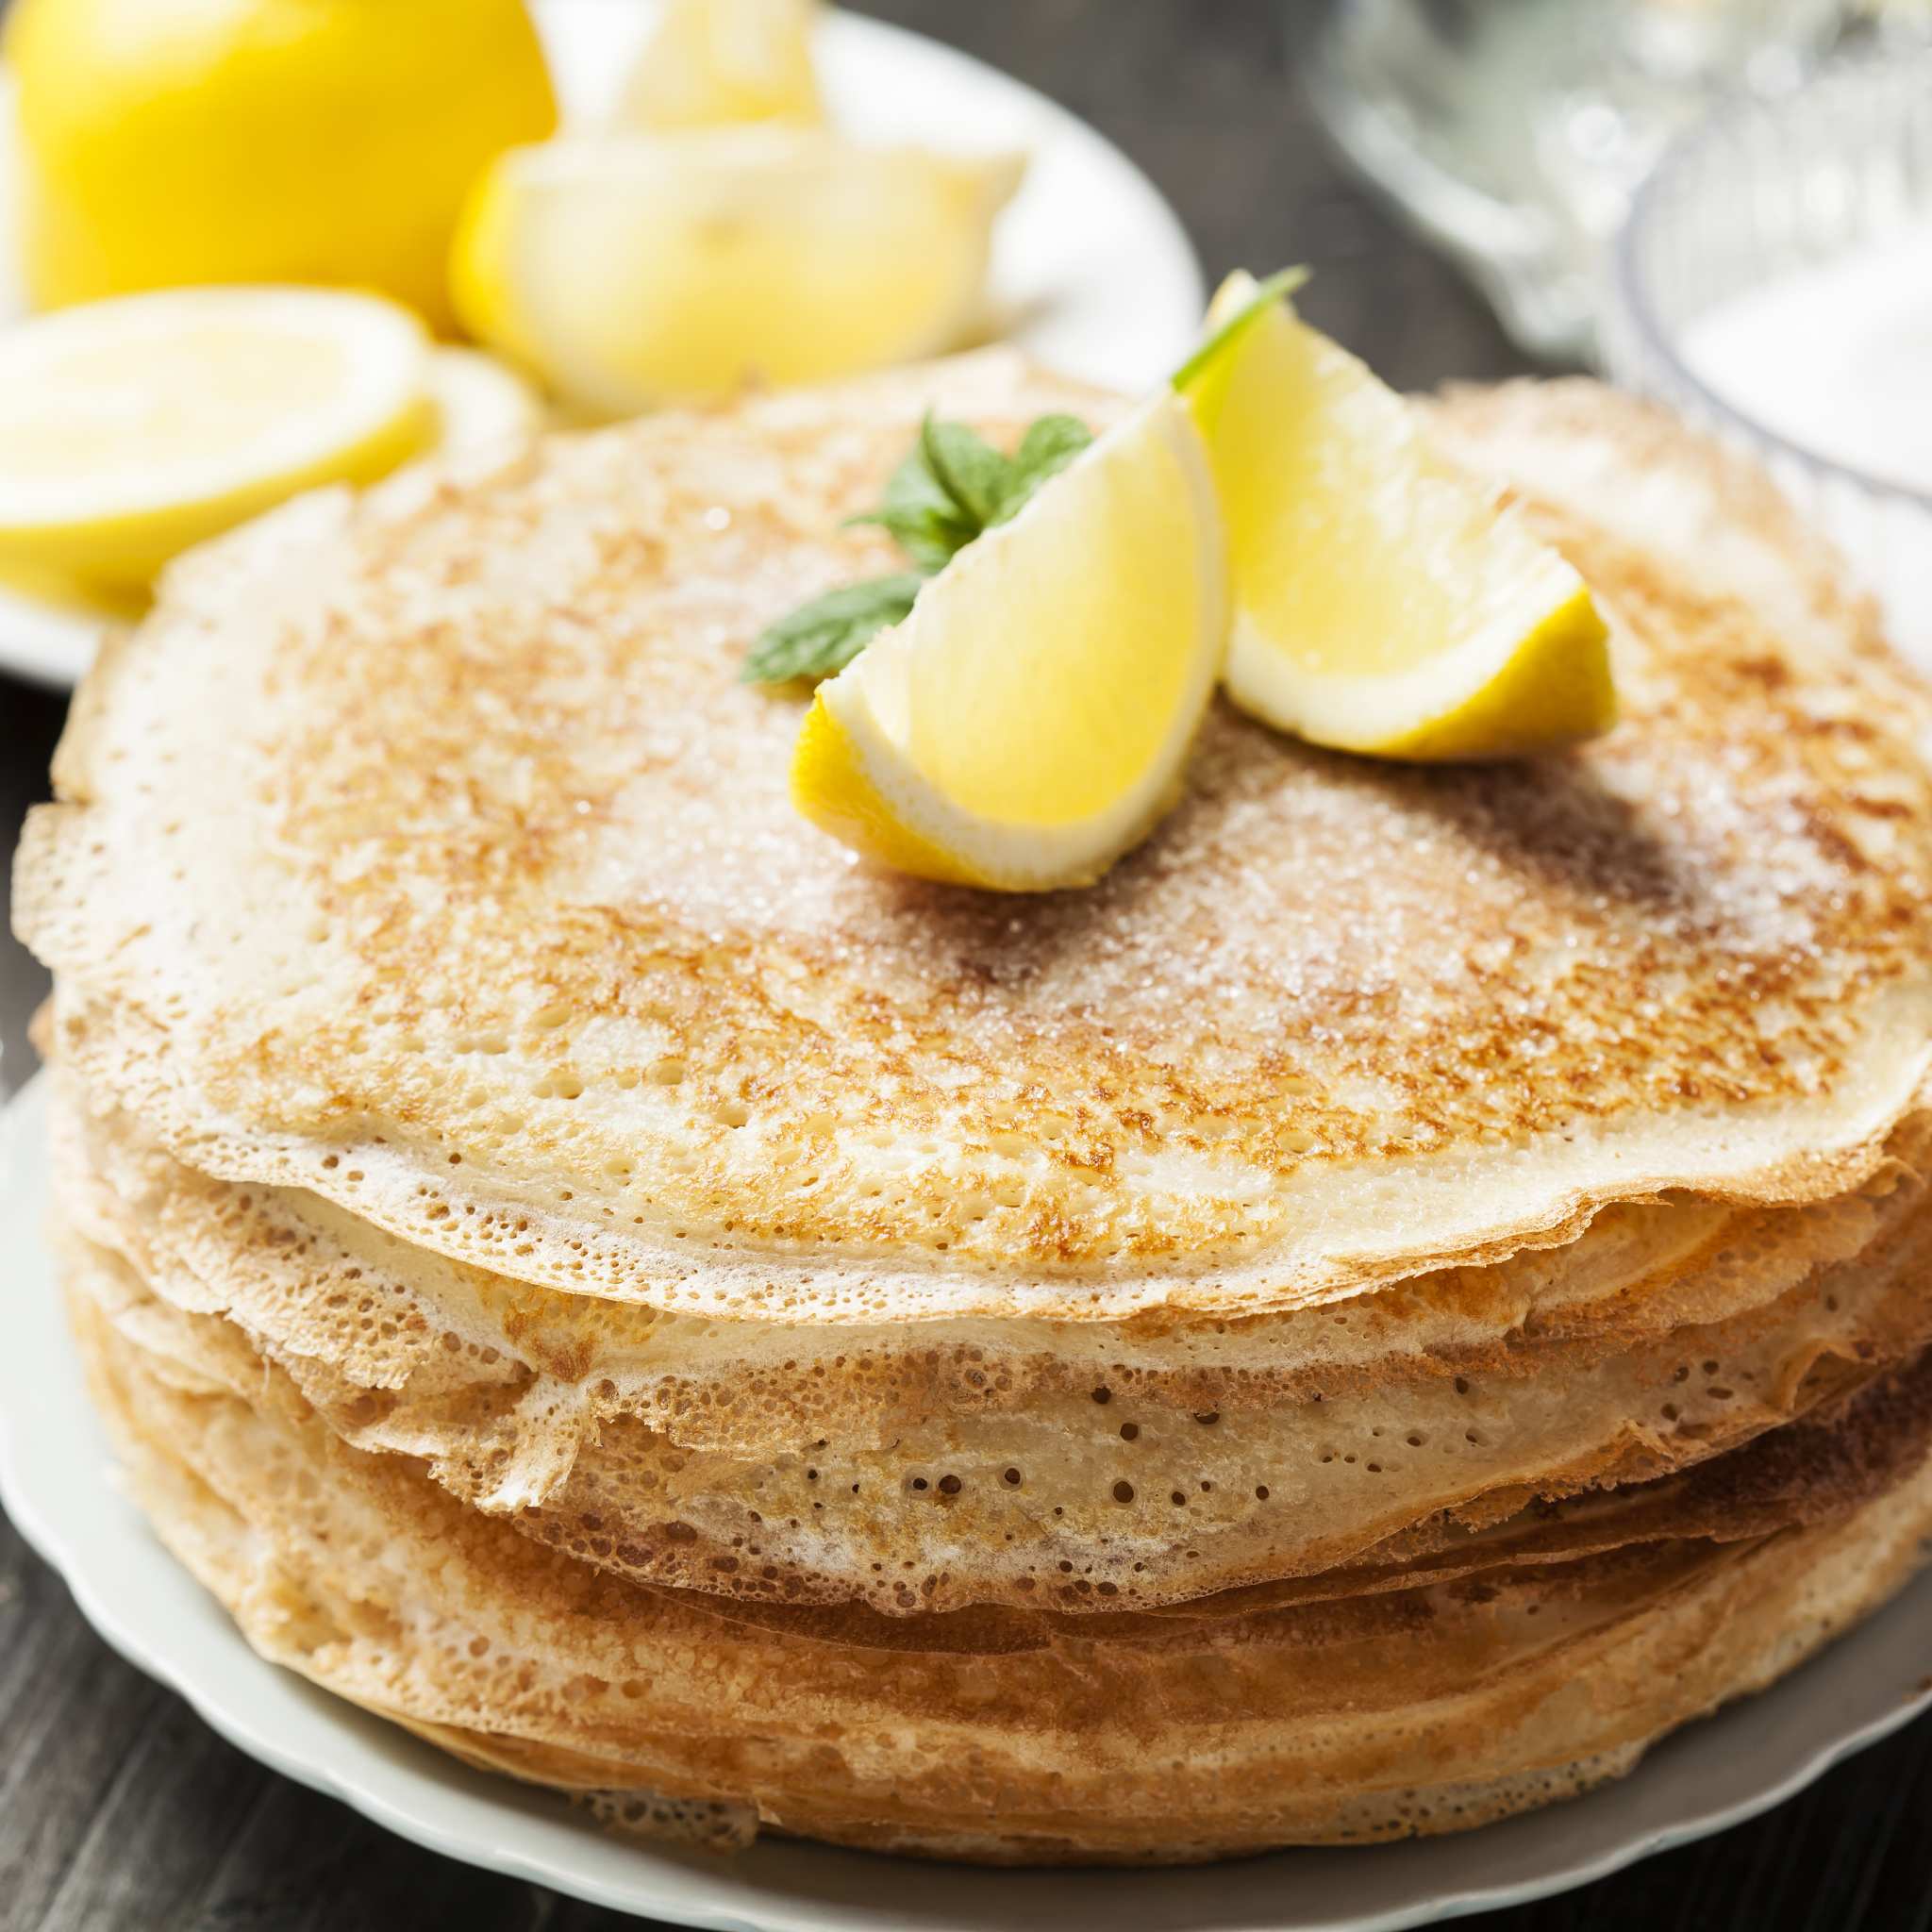 Stack of pancakes sprinkled with sugar and with wedges of lemon on top